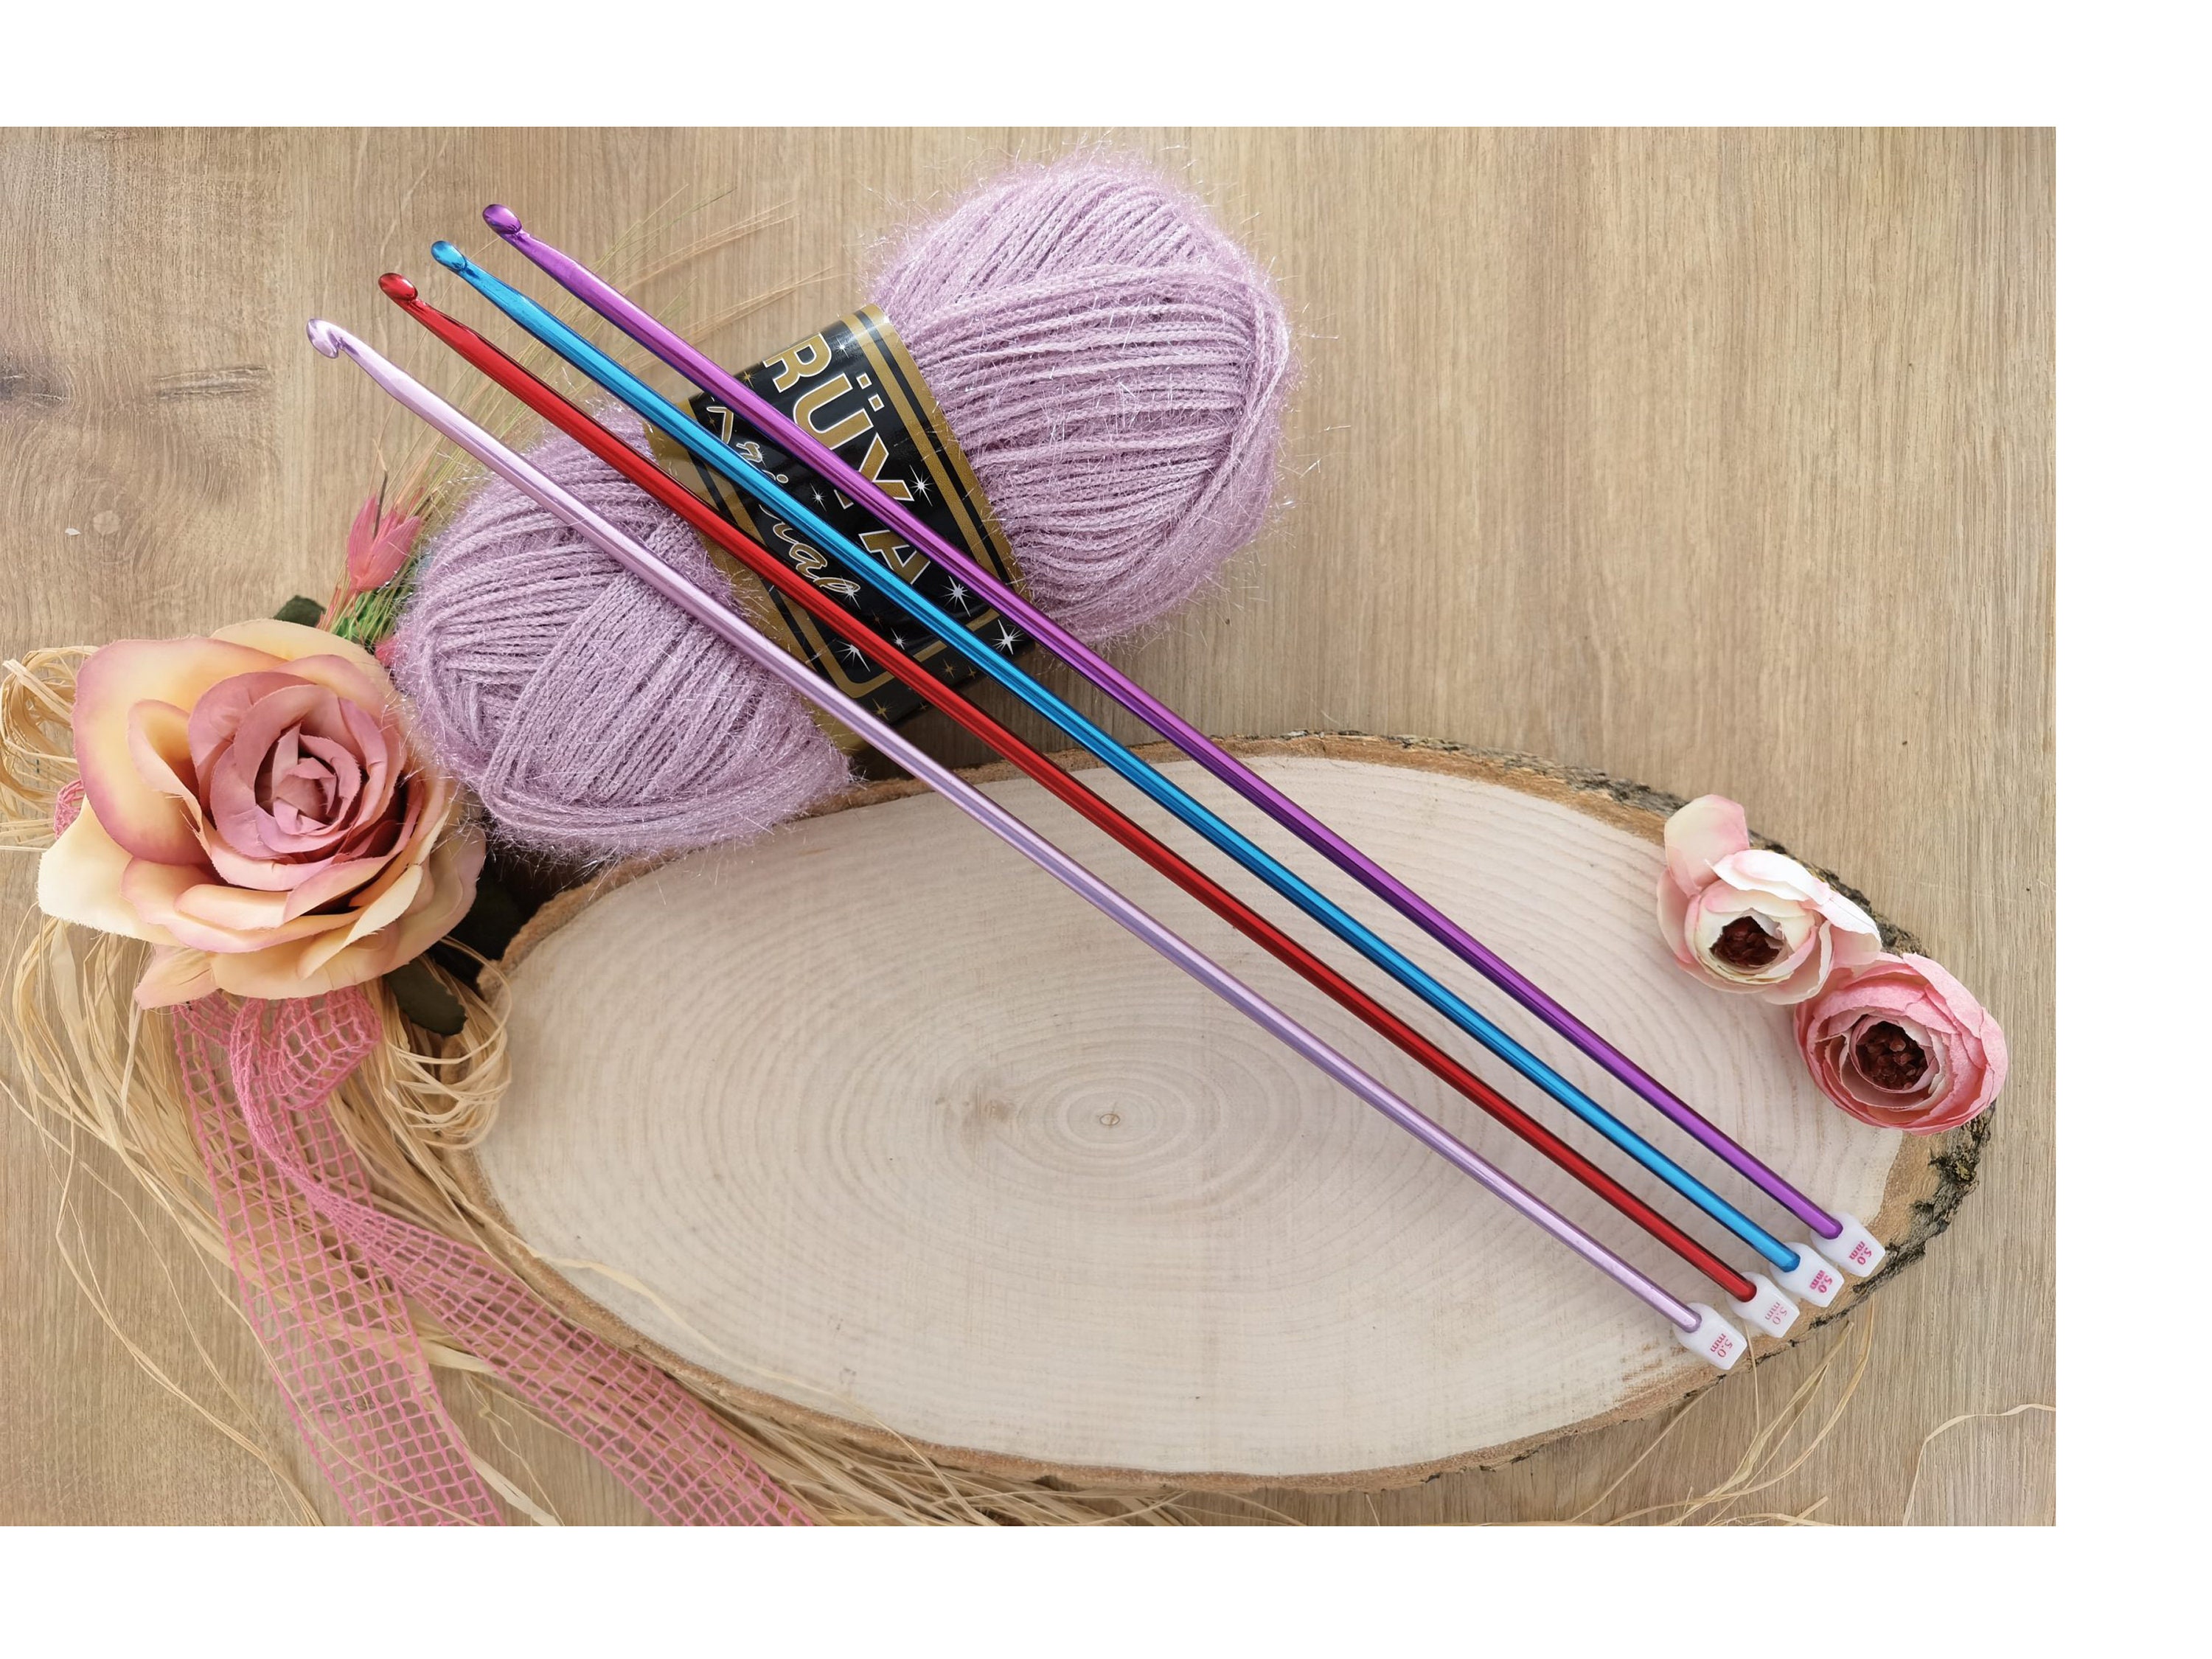  Afghan Tunisian Crochet Hooks Set with Cable and Beads, 12  Sizes 1.2M 48 Carbonized Bamboo Needle for Carpet Knitting